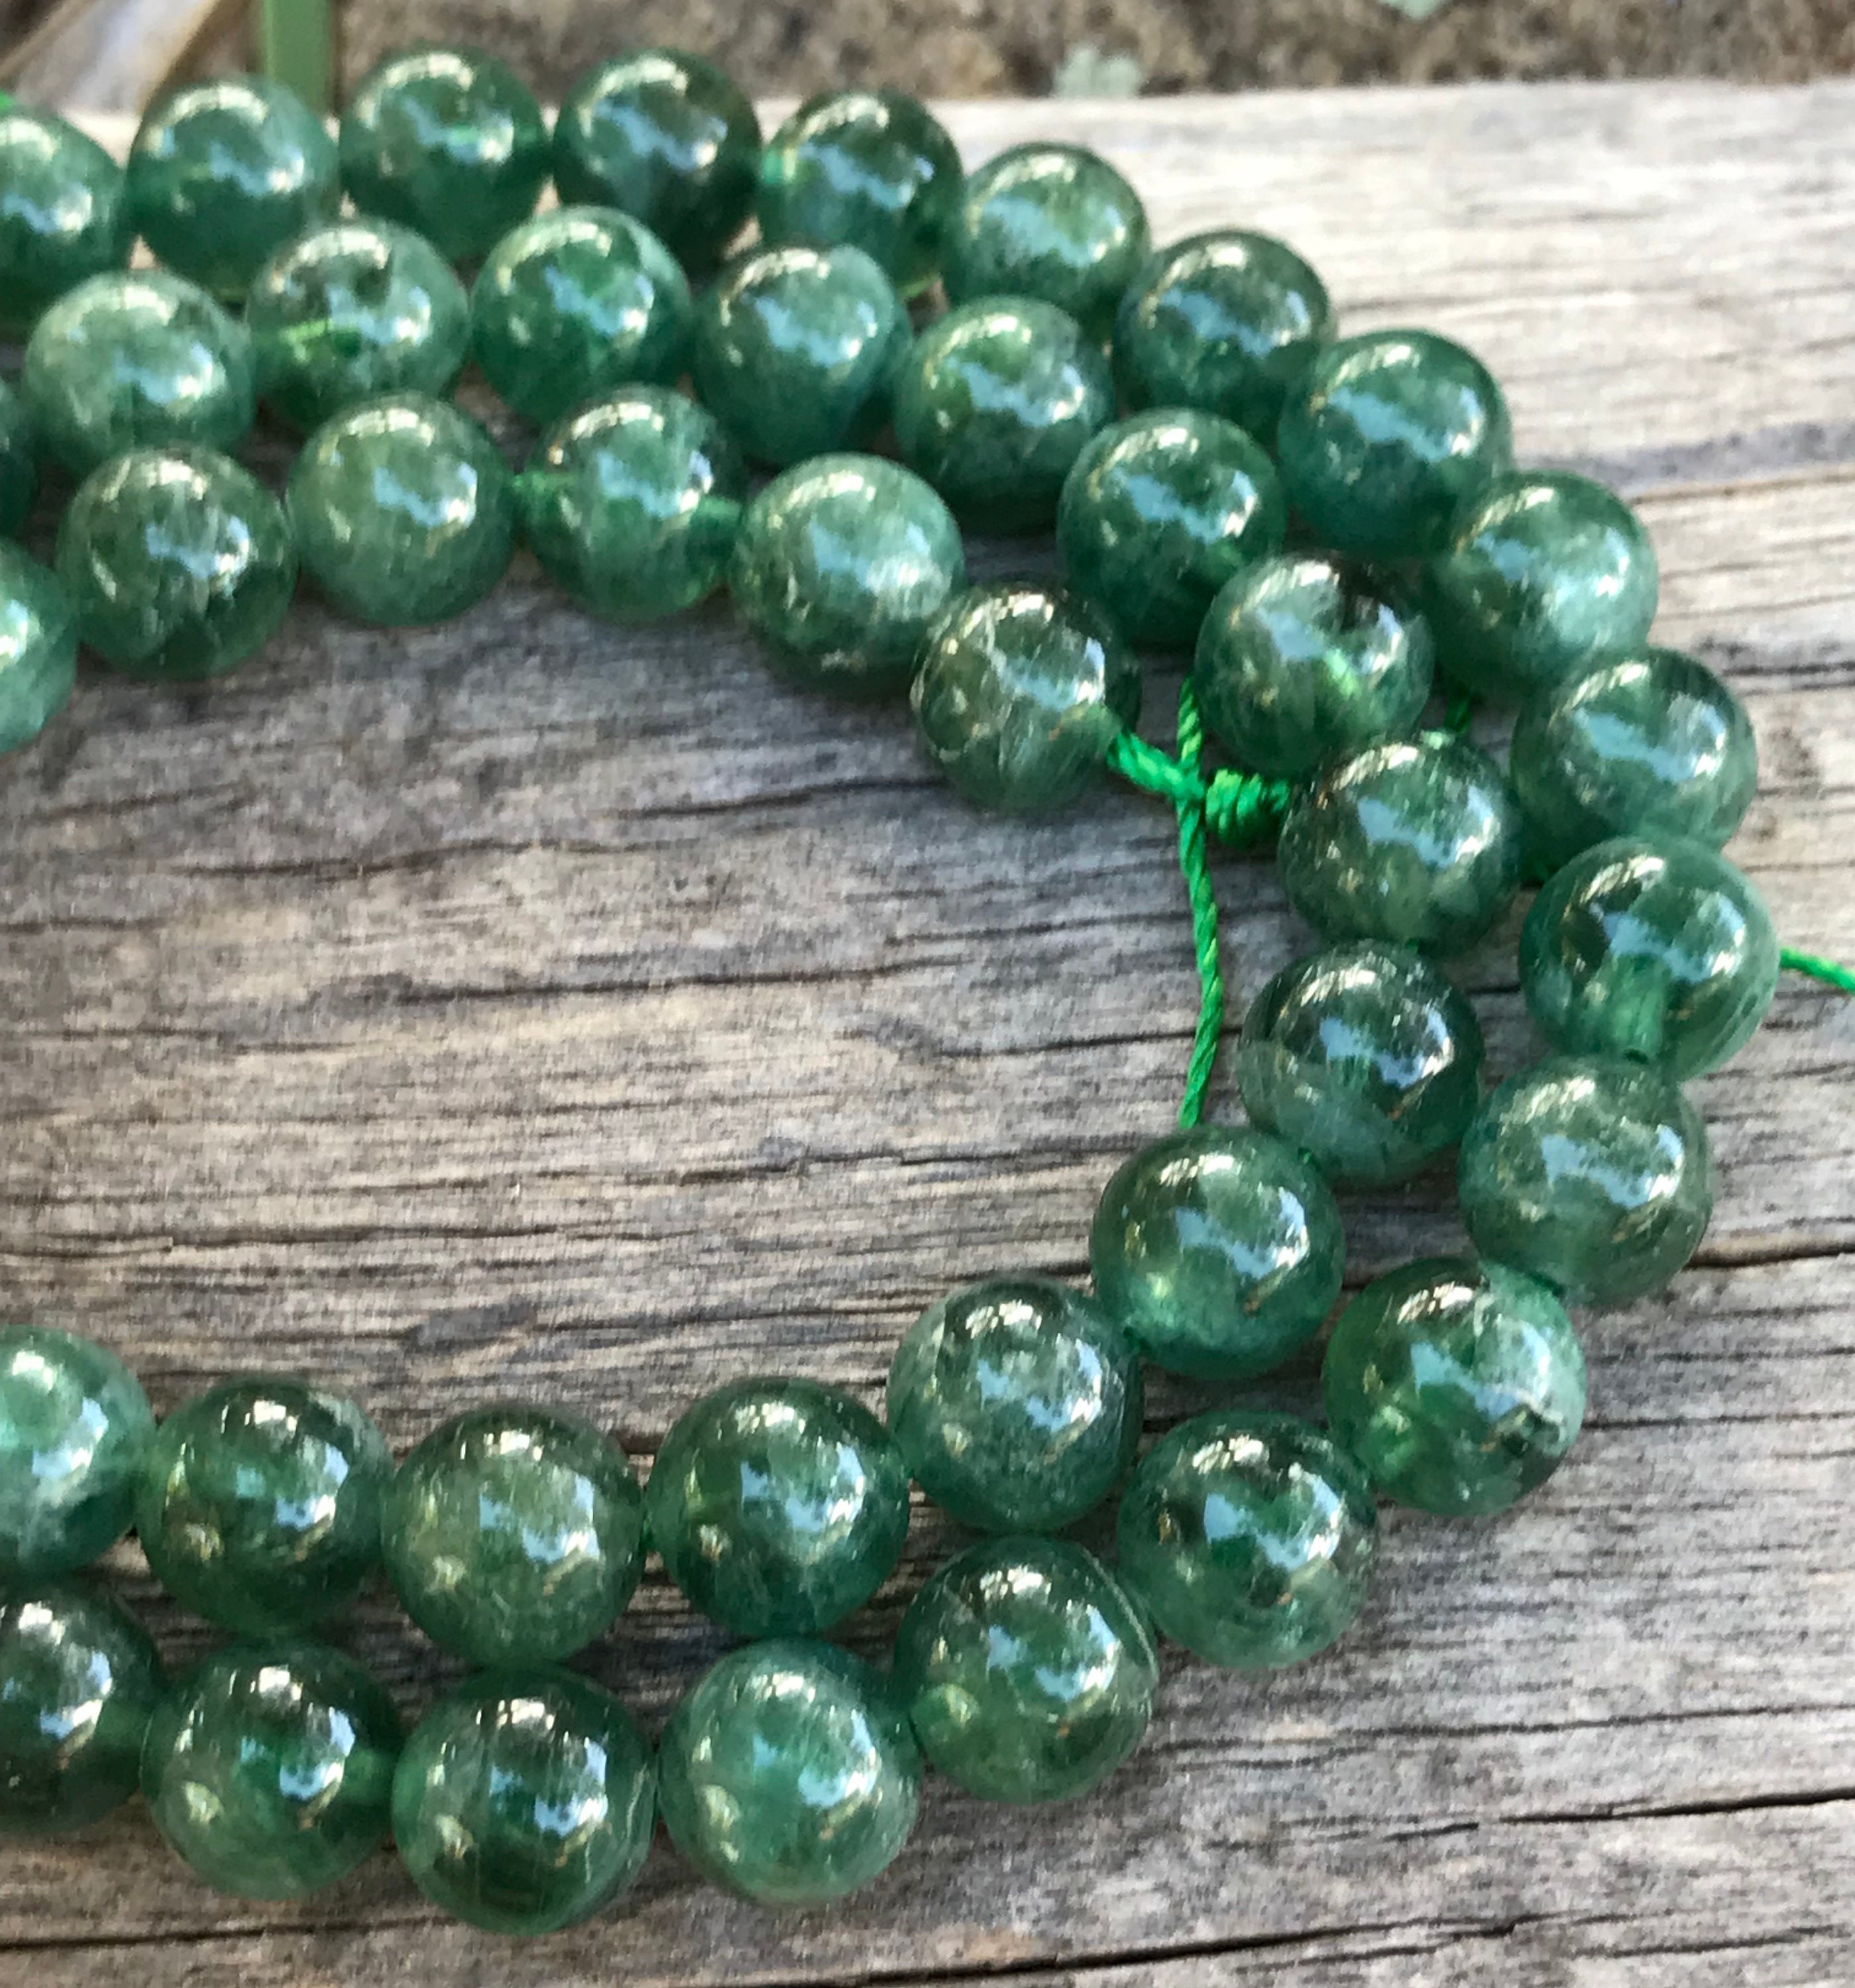 Green Apatite Beads Rounds 7mm Smooth Polished Natural Stone